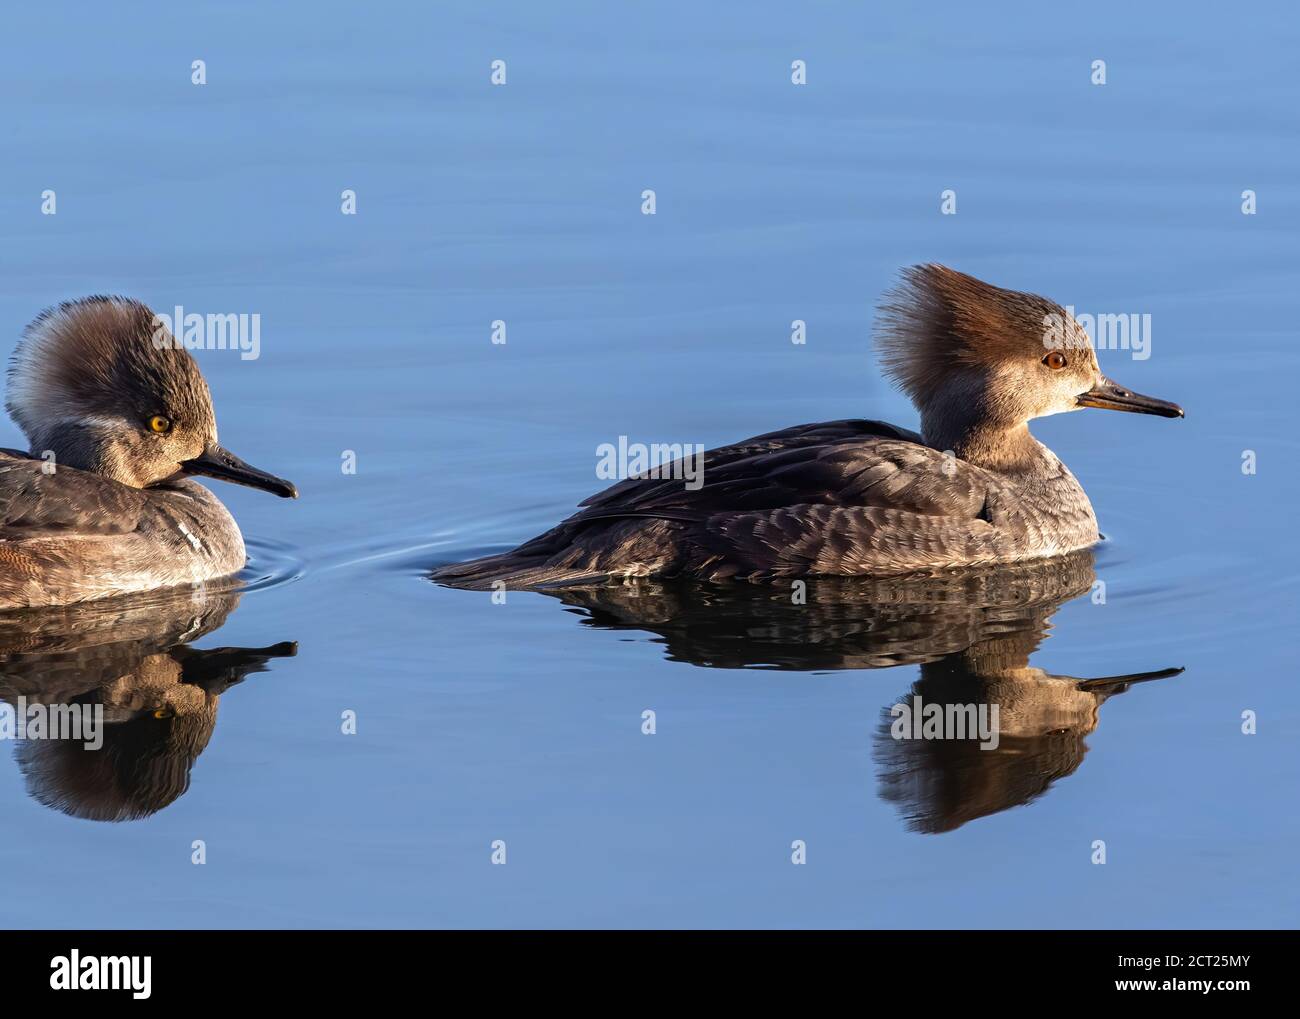 Close up comparison of eye color between a Female Hooded Merganser in front and an Immature Male following, illuminated by the late day sun. Stock Photo